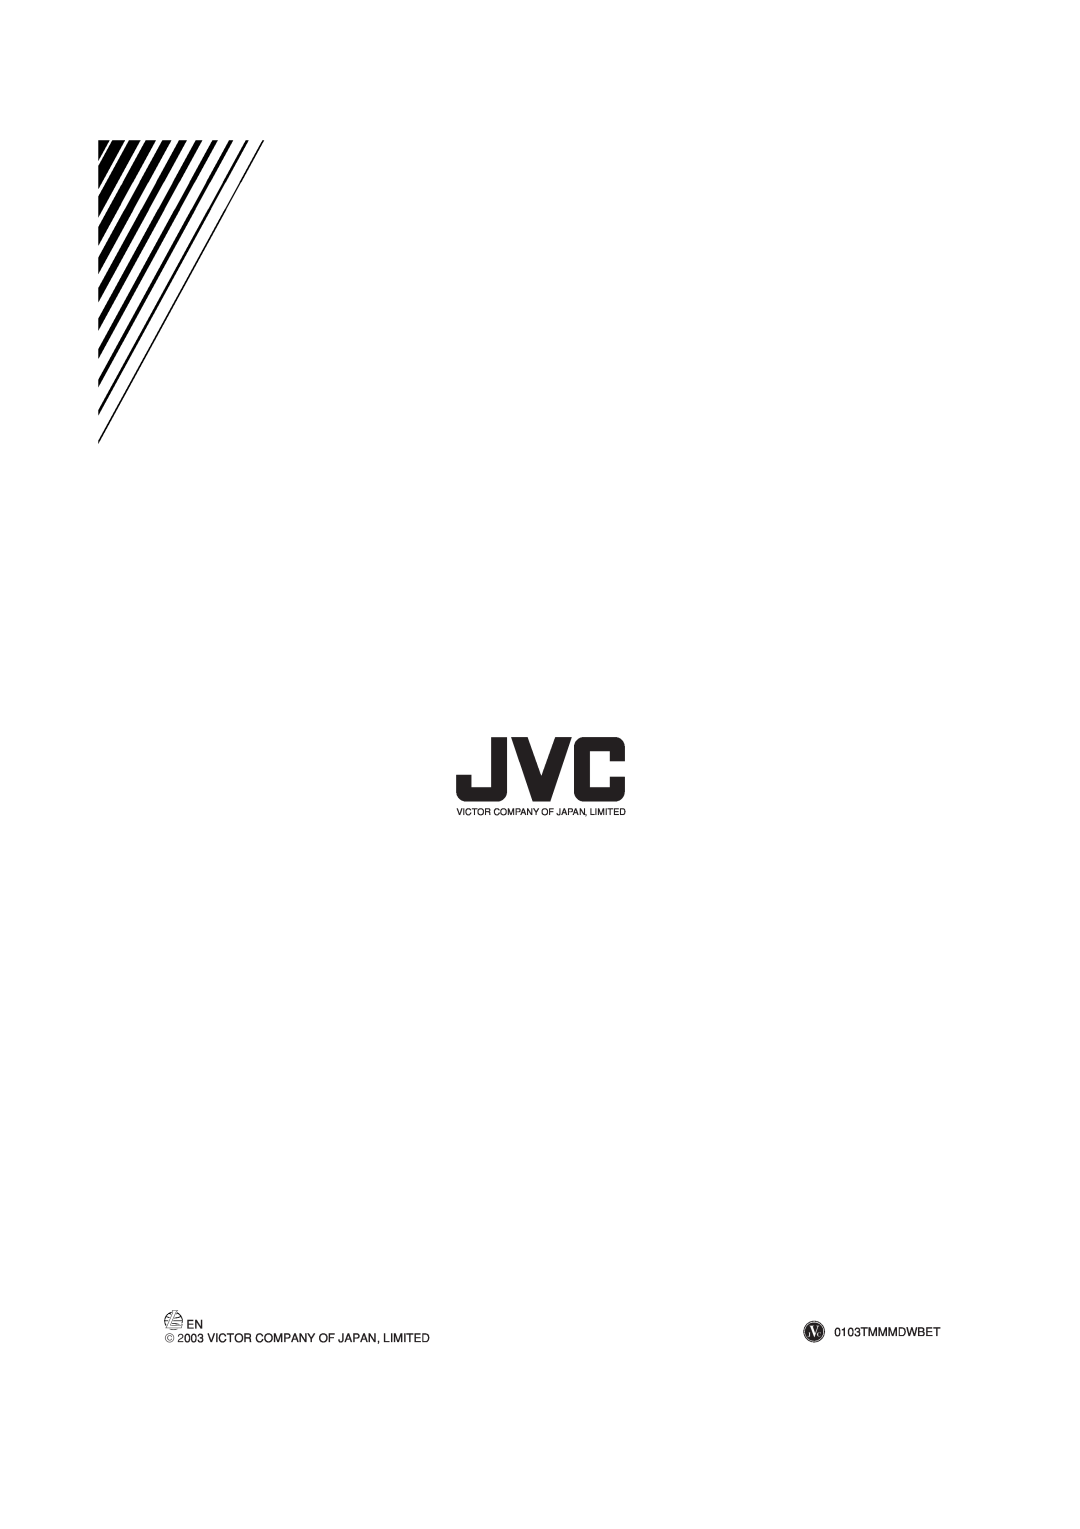 JVC TH-A35 manual 0103TMMMDWBET, Victor Company Of Japan, Limited 